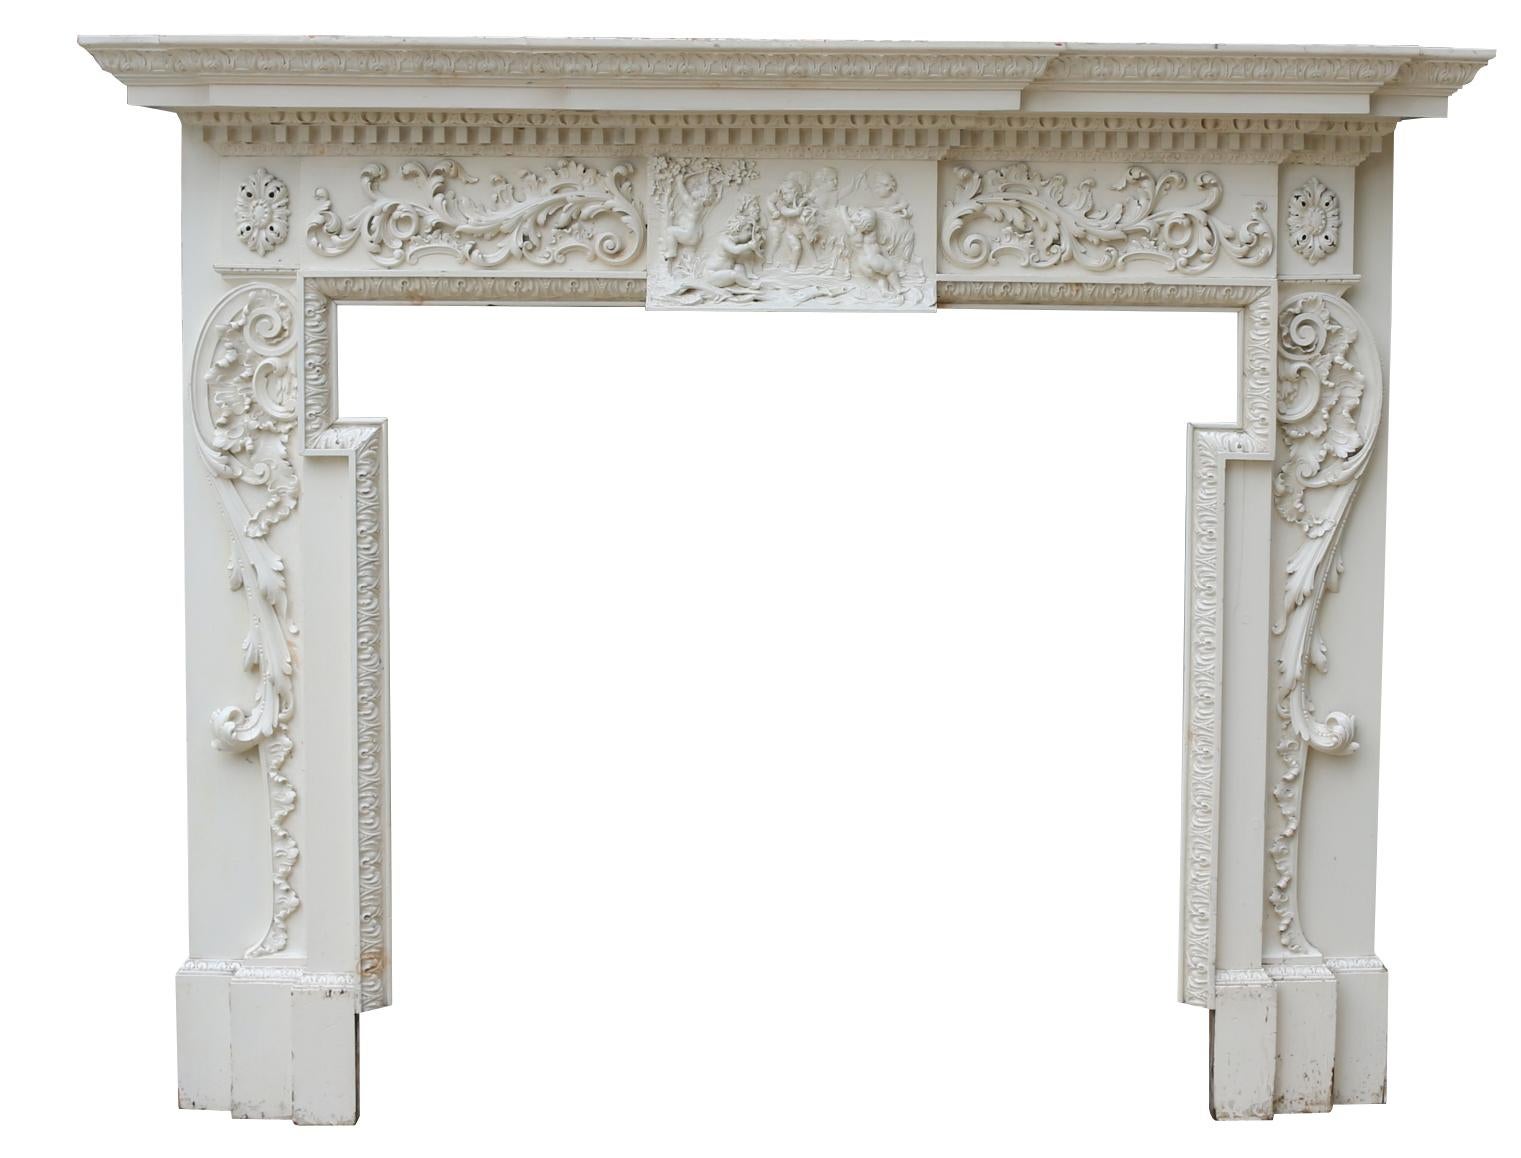 fire surround for sale